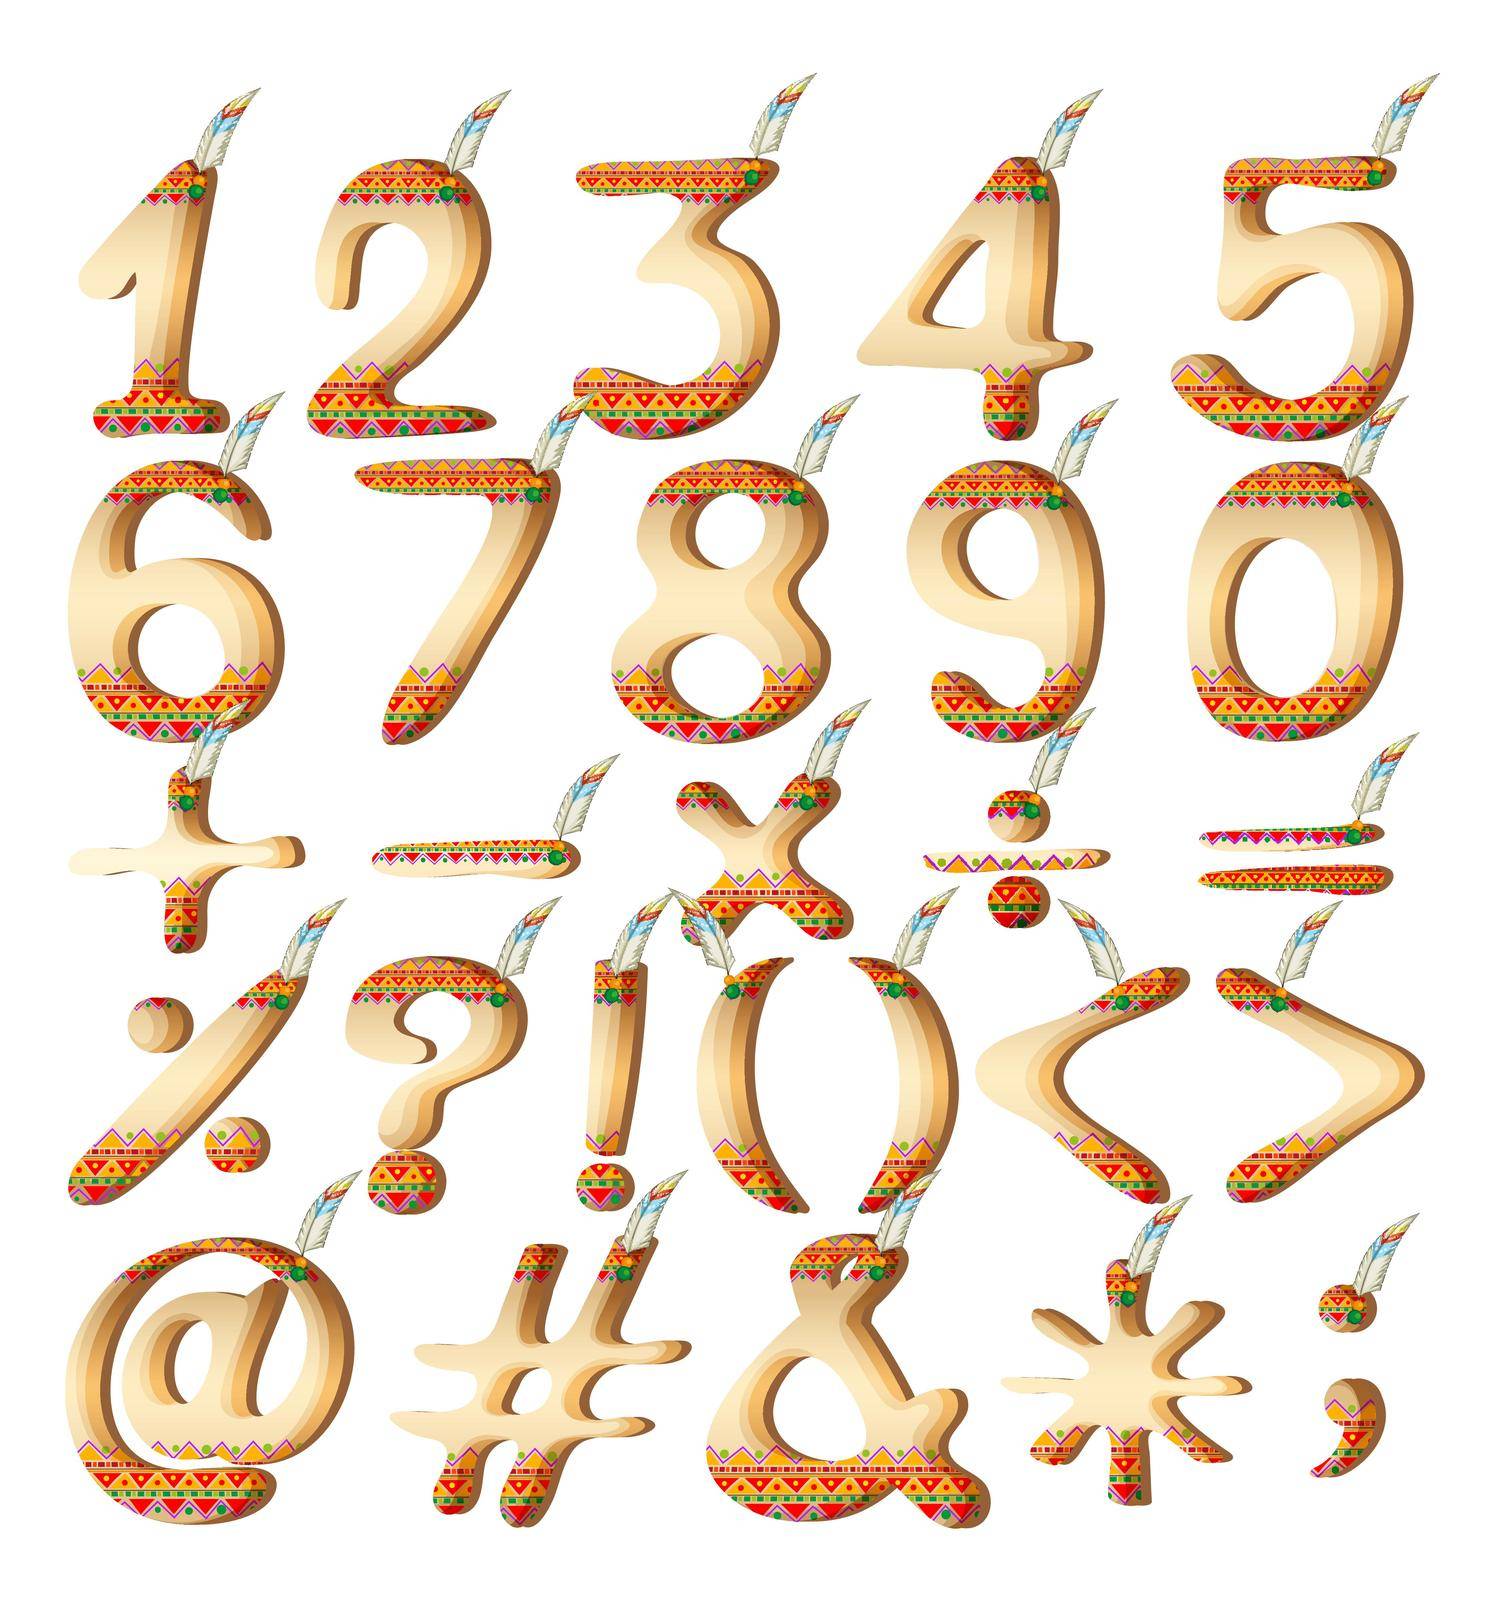 Set of numeric figures in Indian artwork on a white background